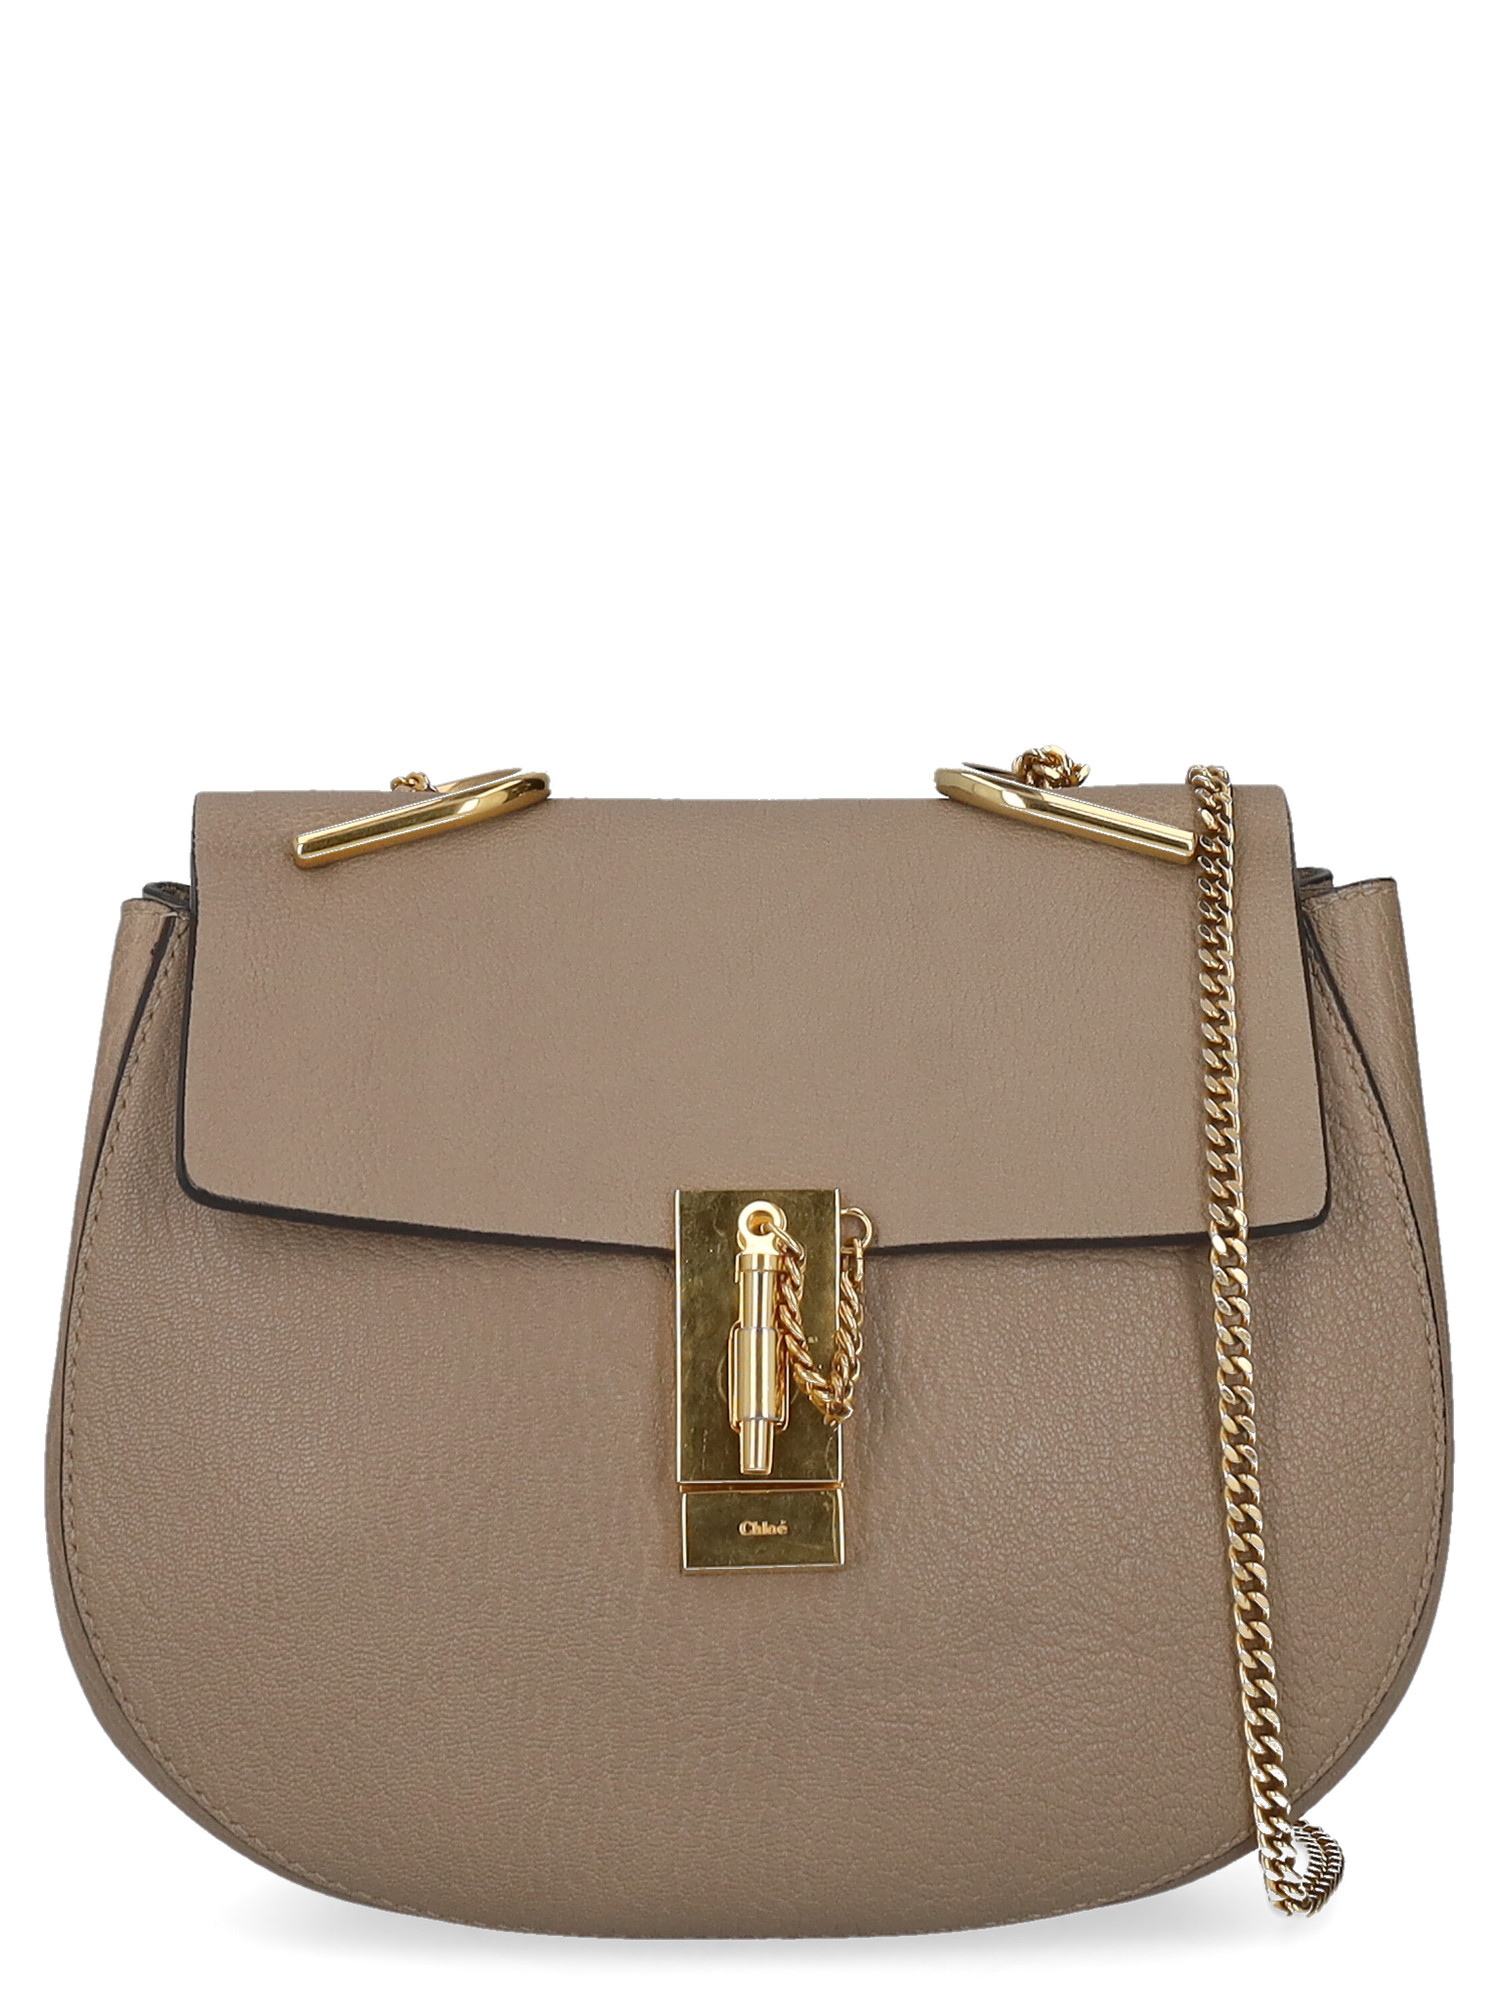 Condition: Good, Solid Color Leather, Color: Beige -  -  -